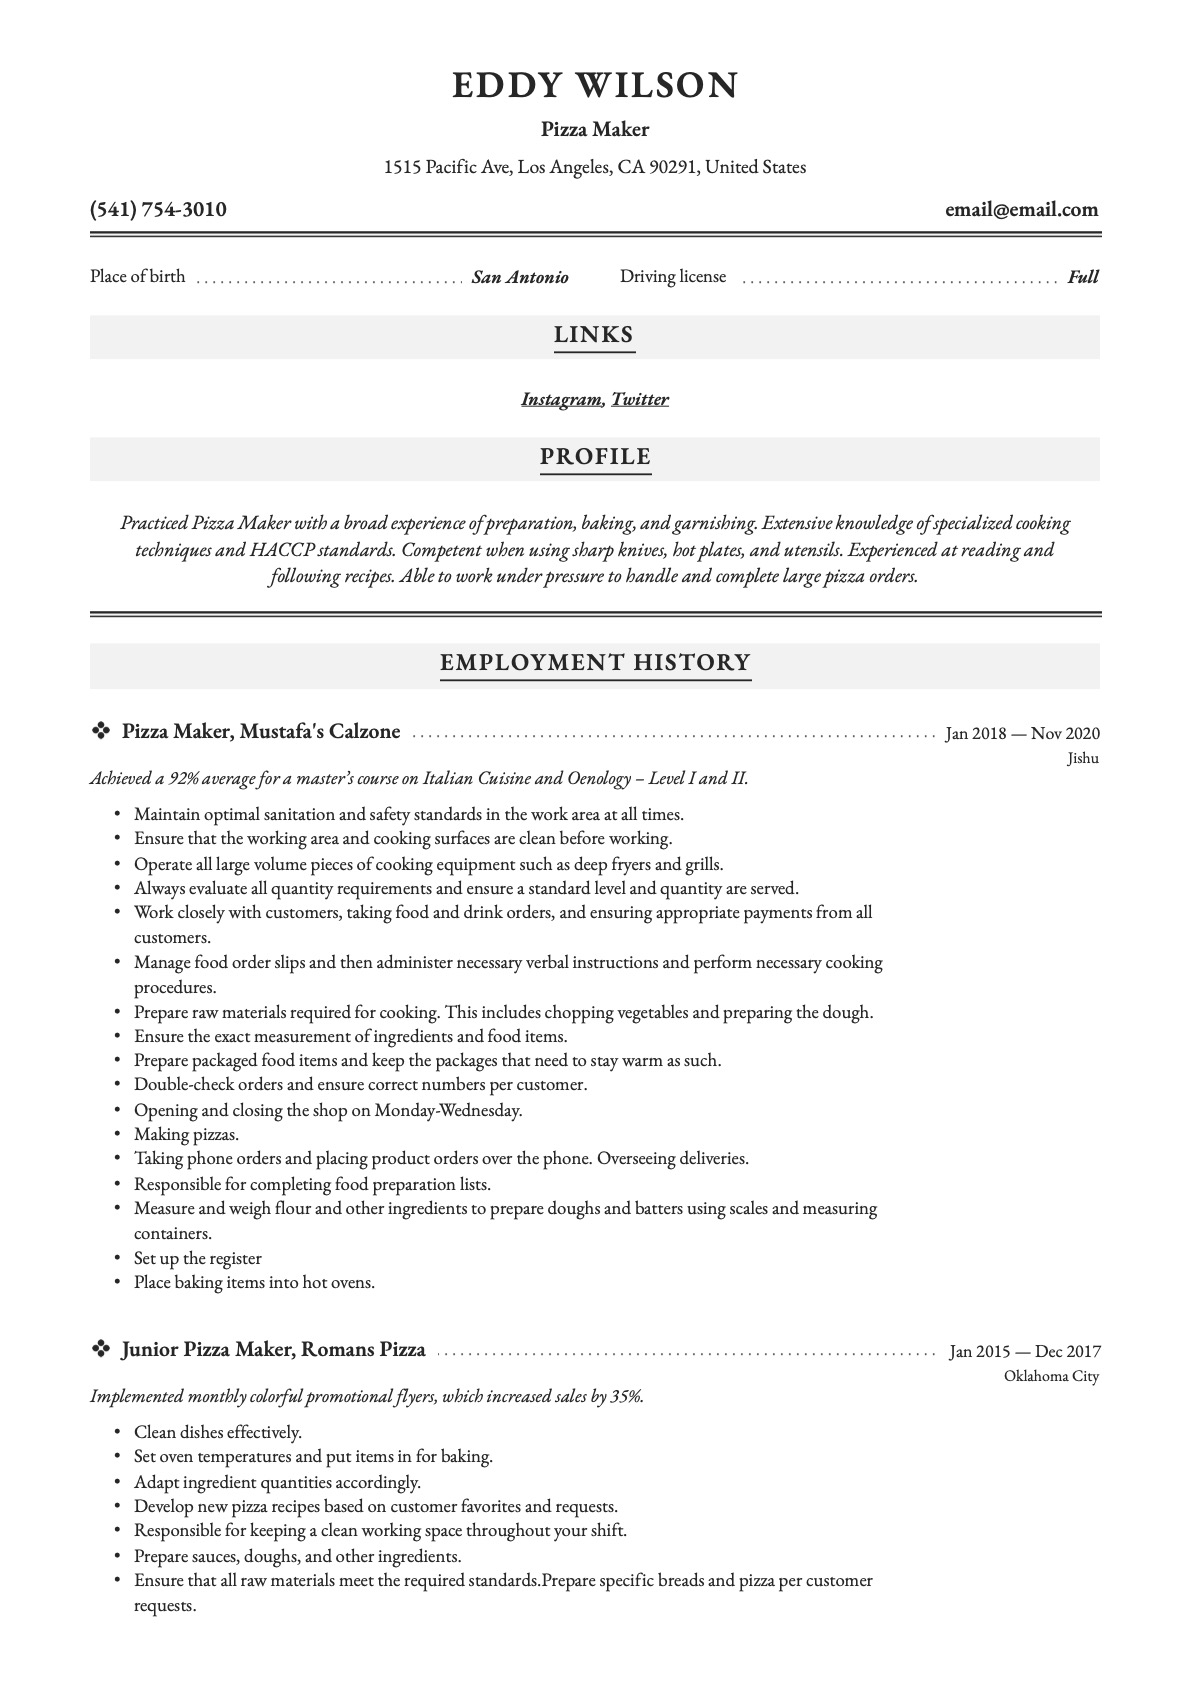 Example Resume Pizza Maker-10